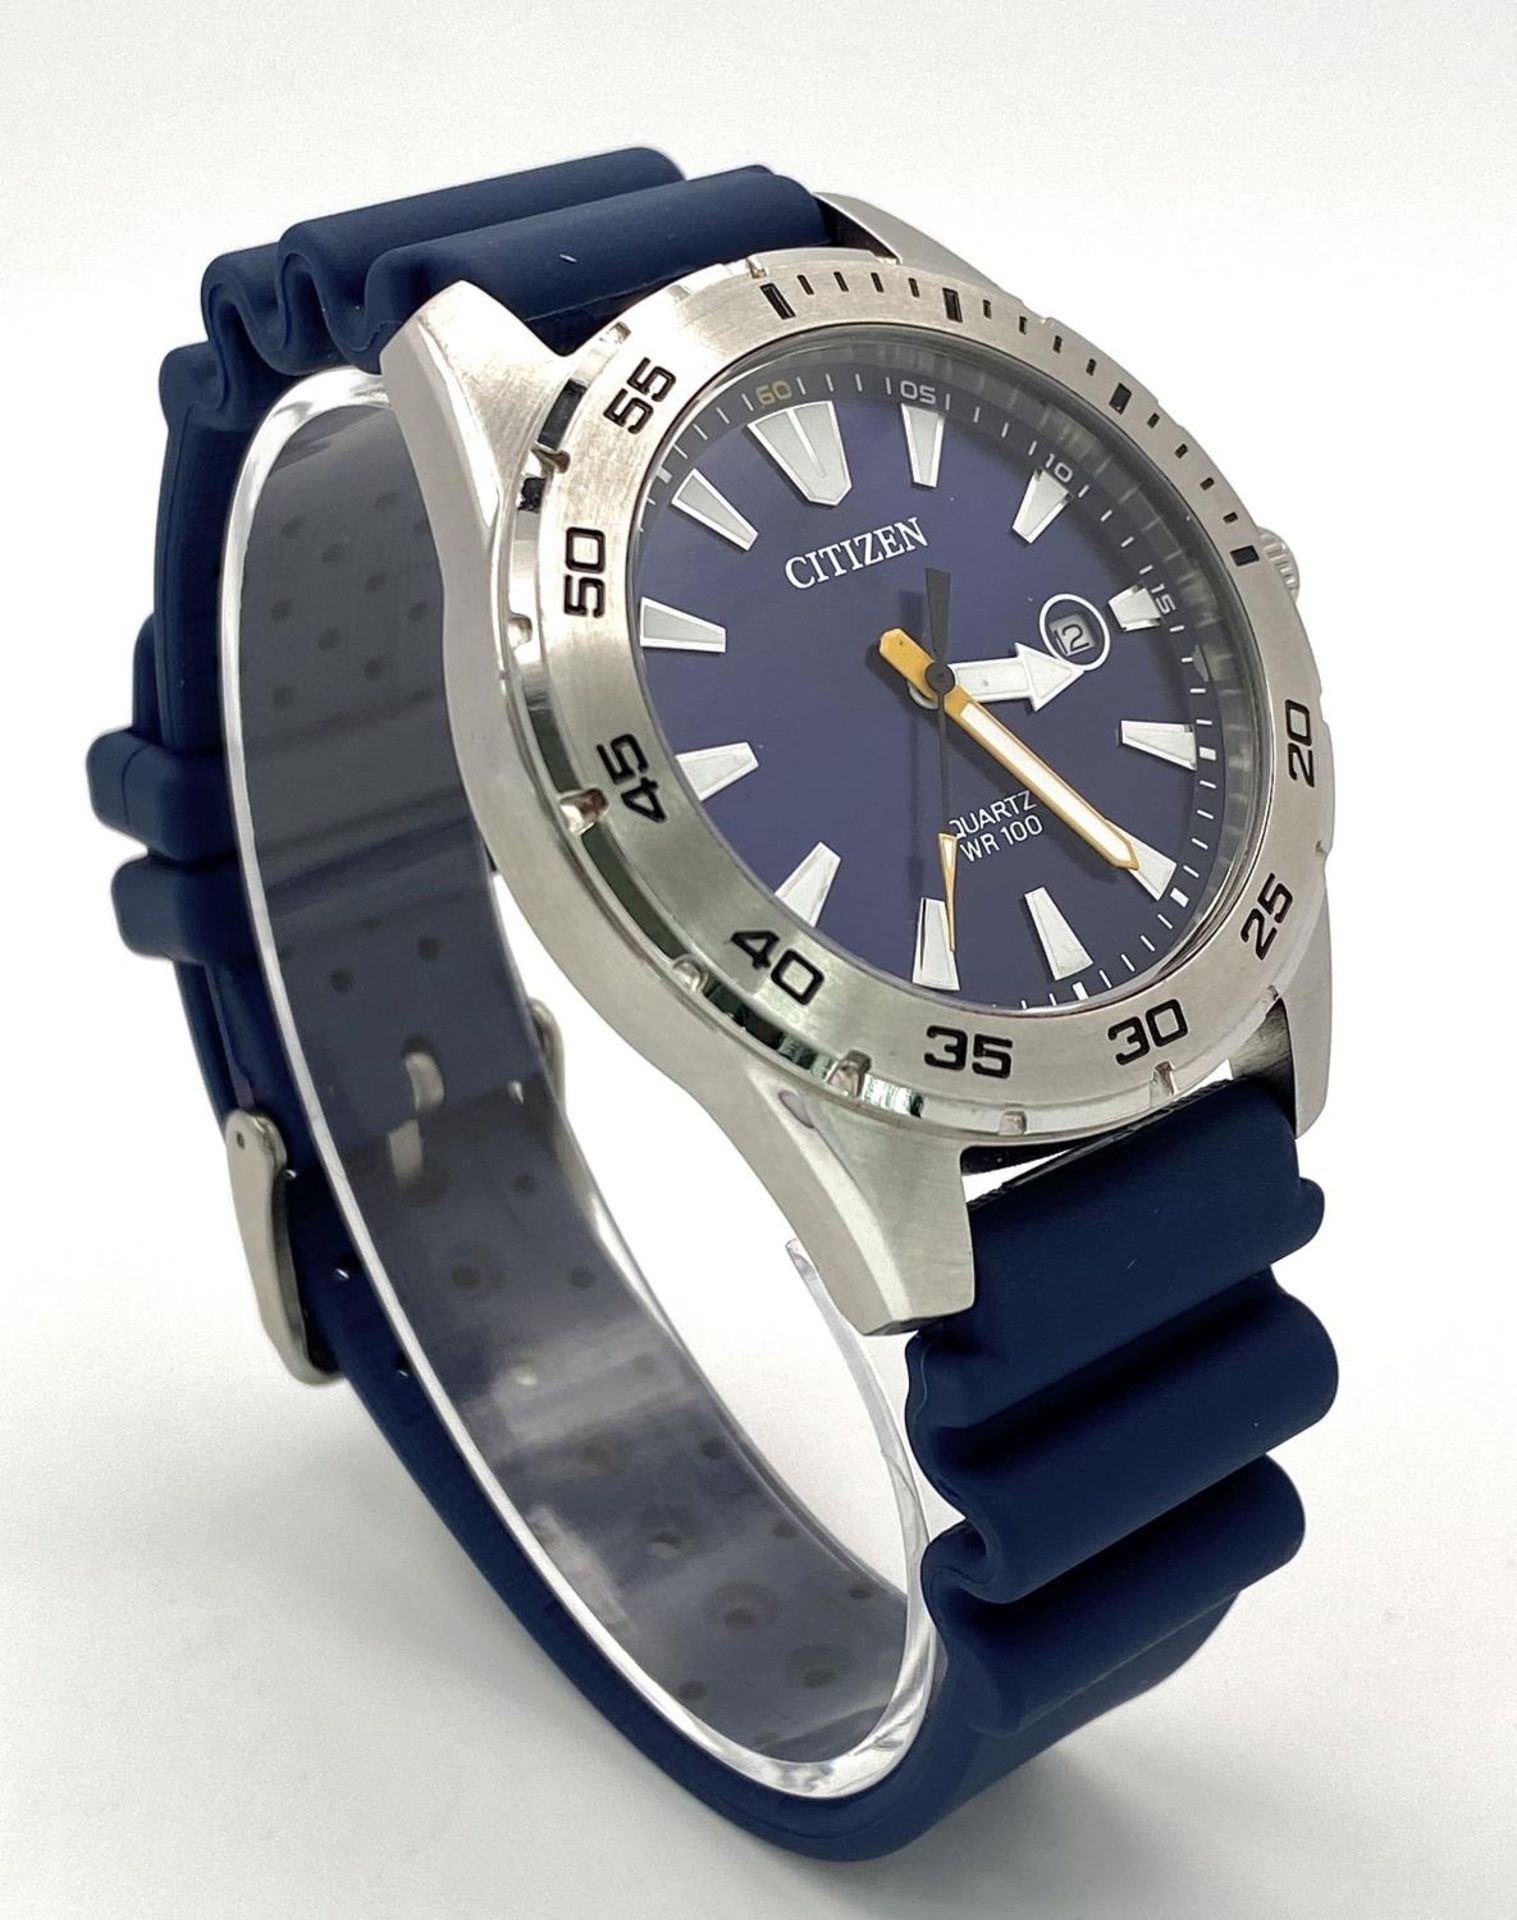 A Citizen Quartz Gents Watch. Blue rubber strap. Stainless steel case - 42mm. Blue dial with date - Image 4 of 6